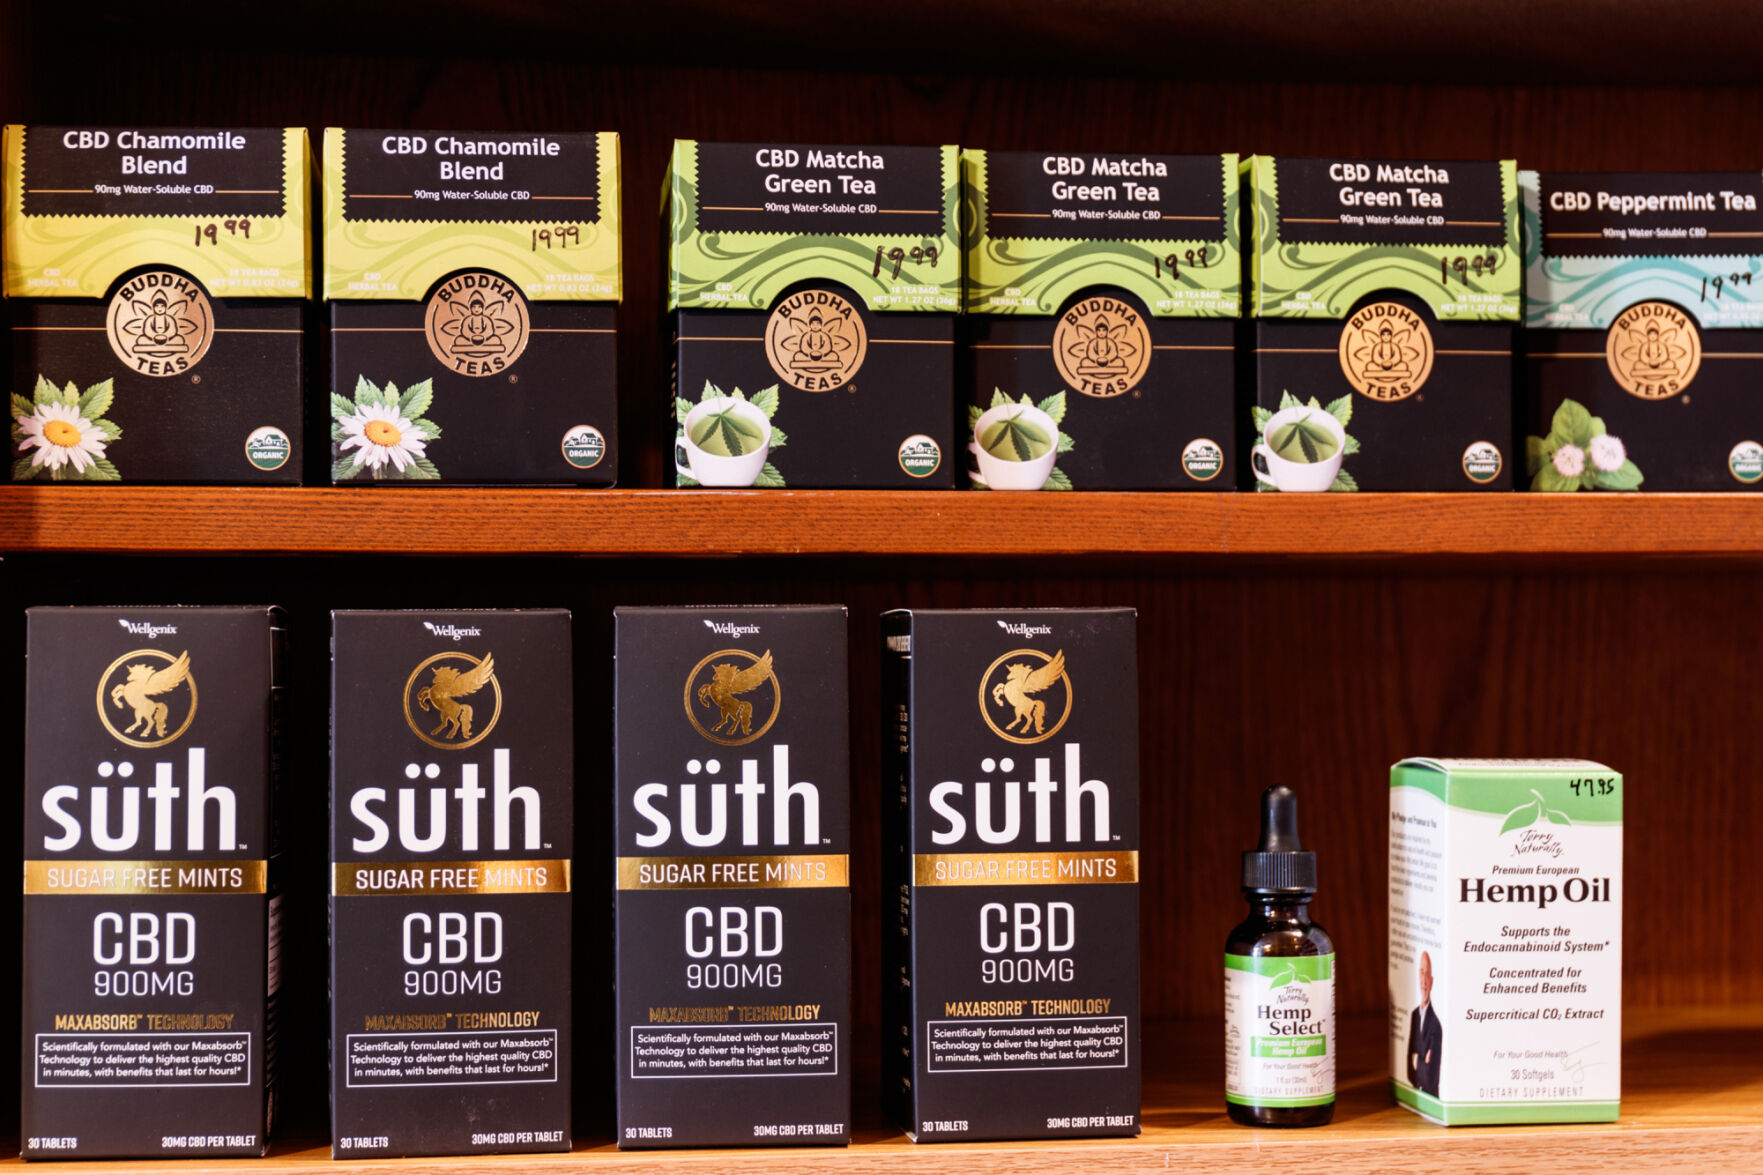 FDA seeks end of regulatory wild west for CBD products